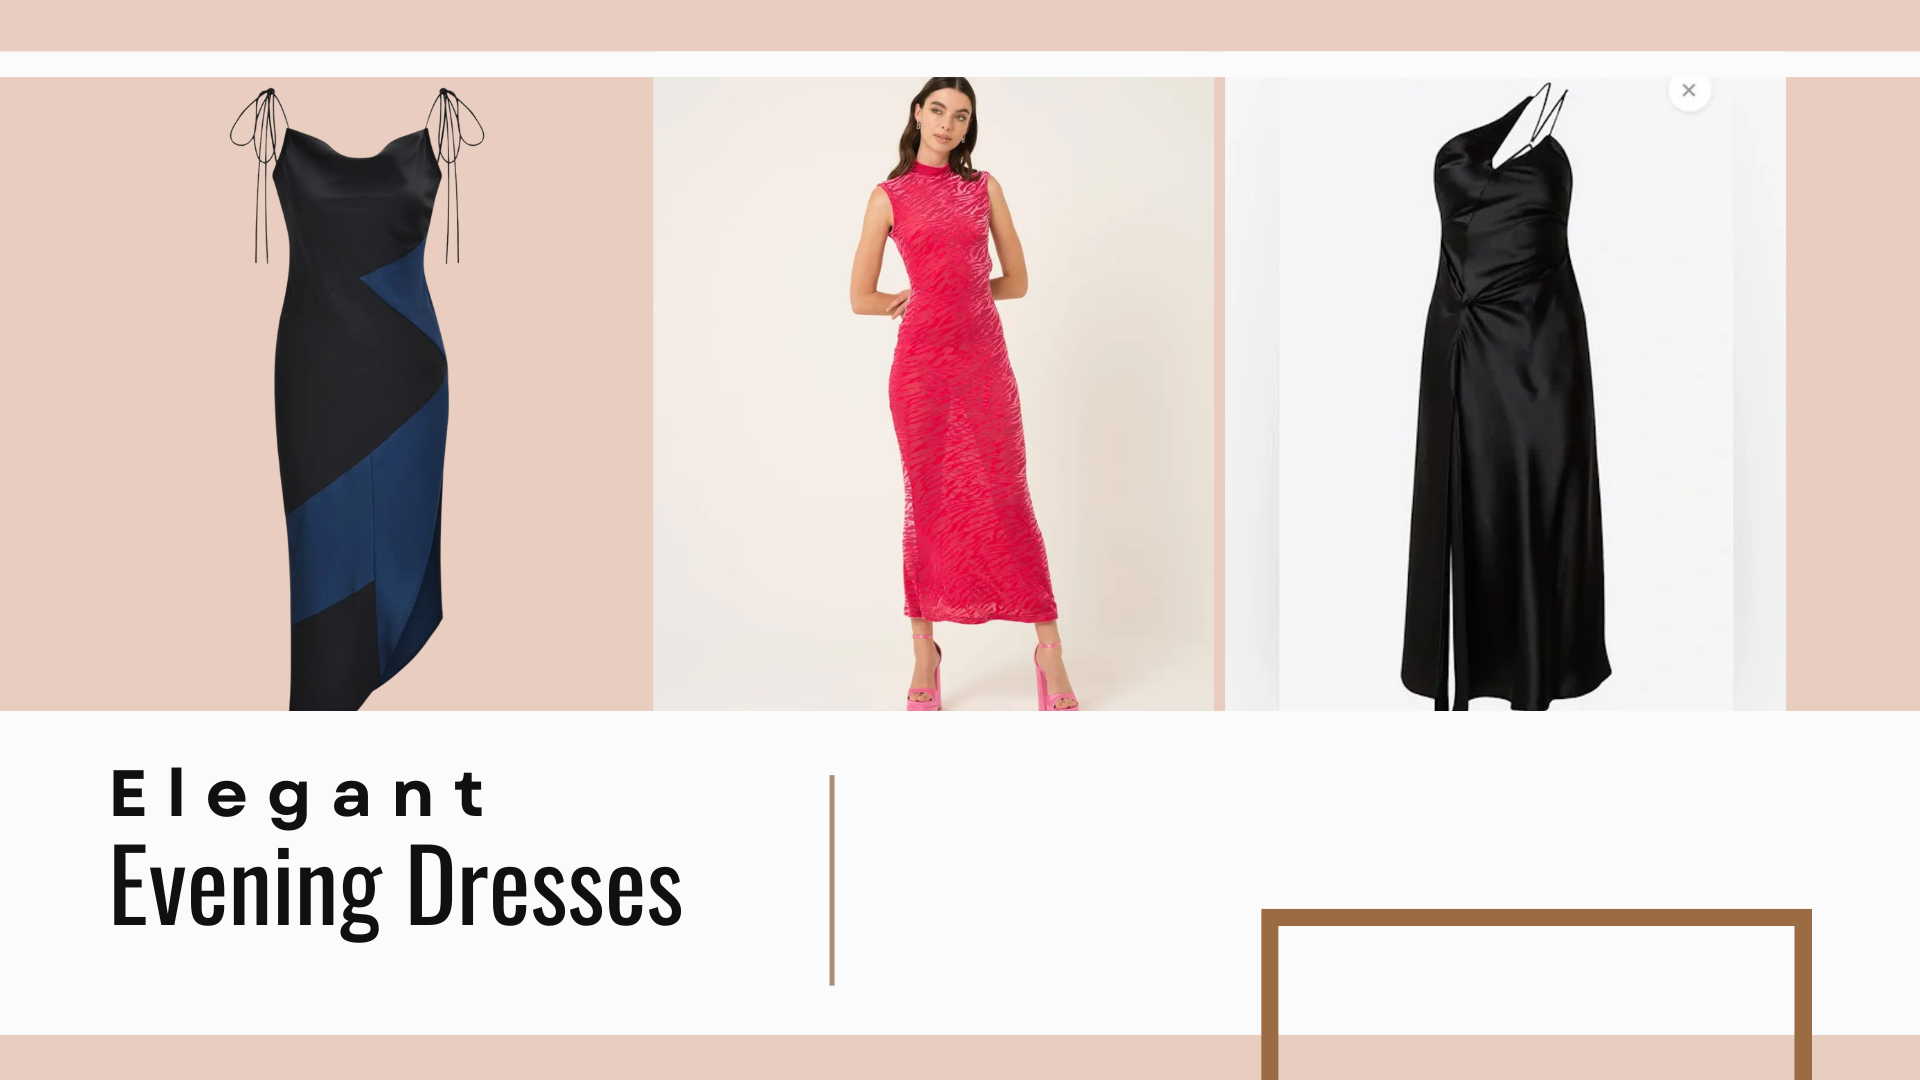 Elegant Evening Dresses: A Blend of Classic and Contemporary Styles